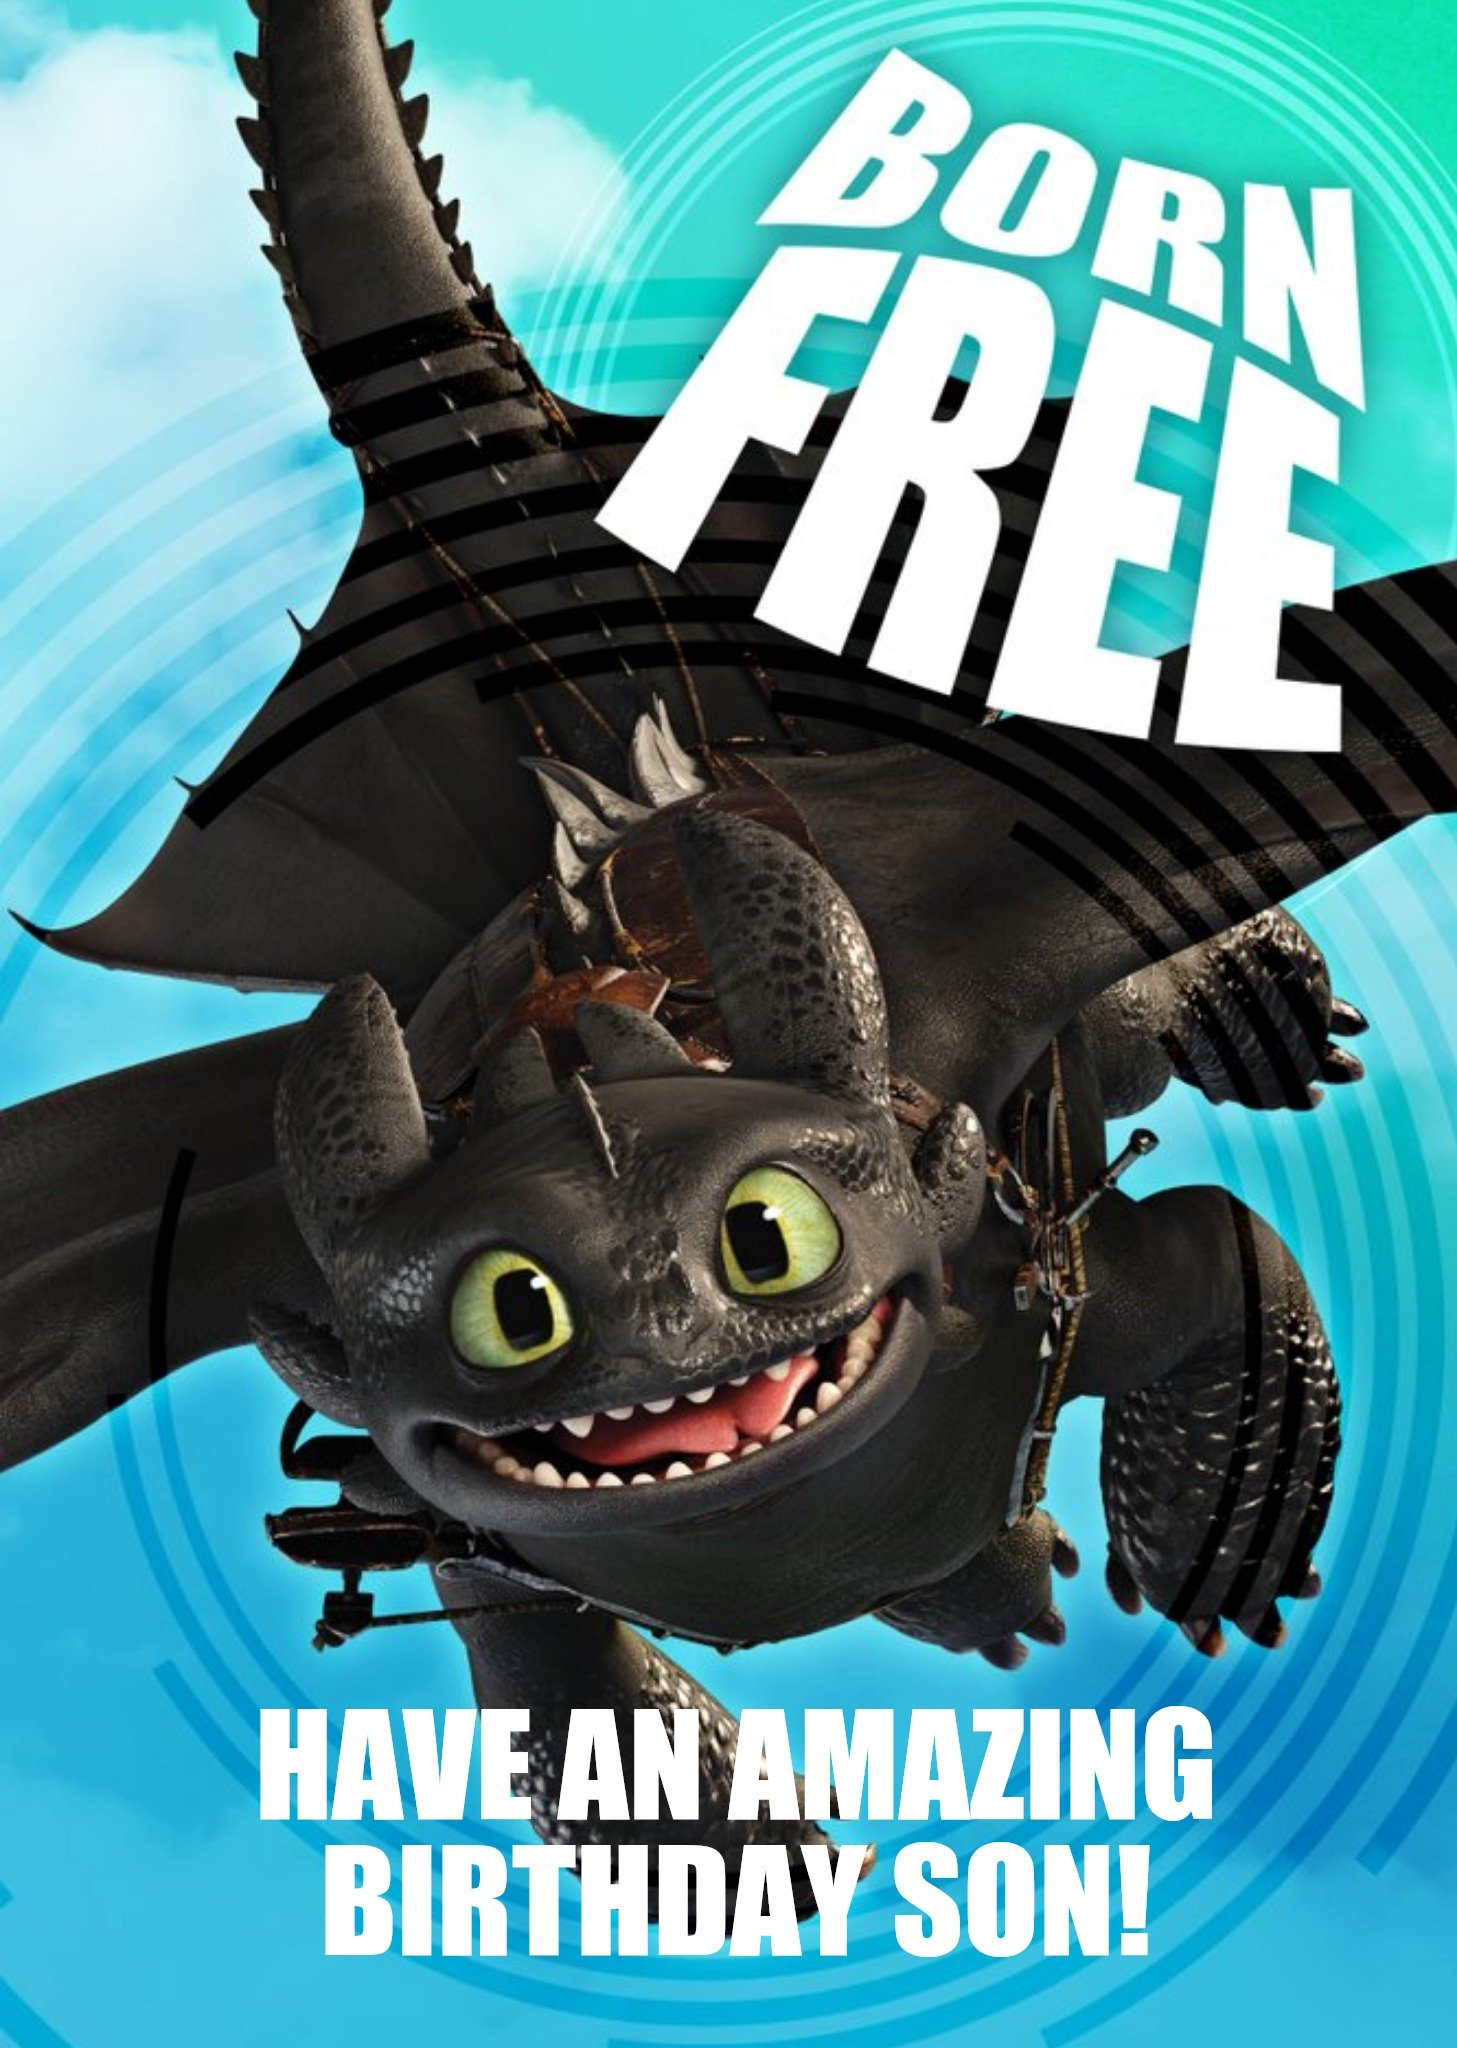 Other Born Free - How To Train Your Dragon Birthday Card, Large